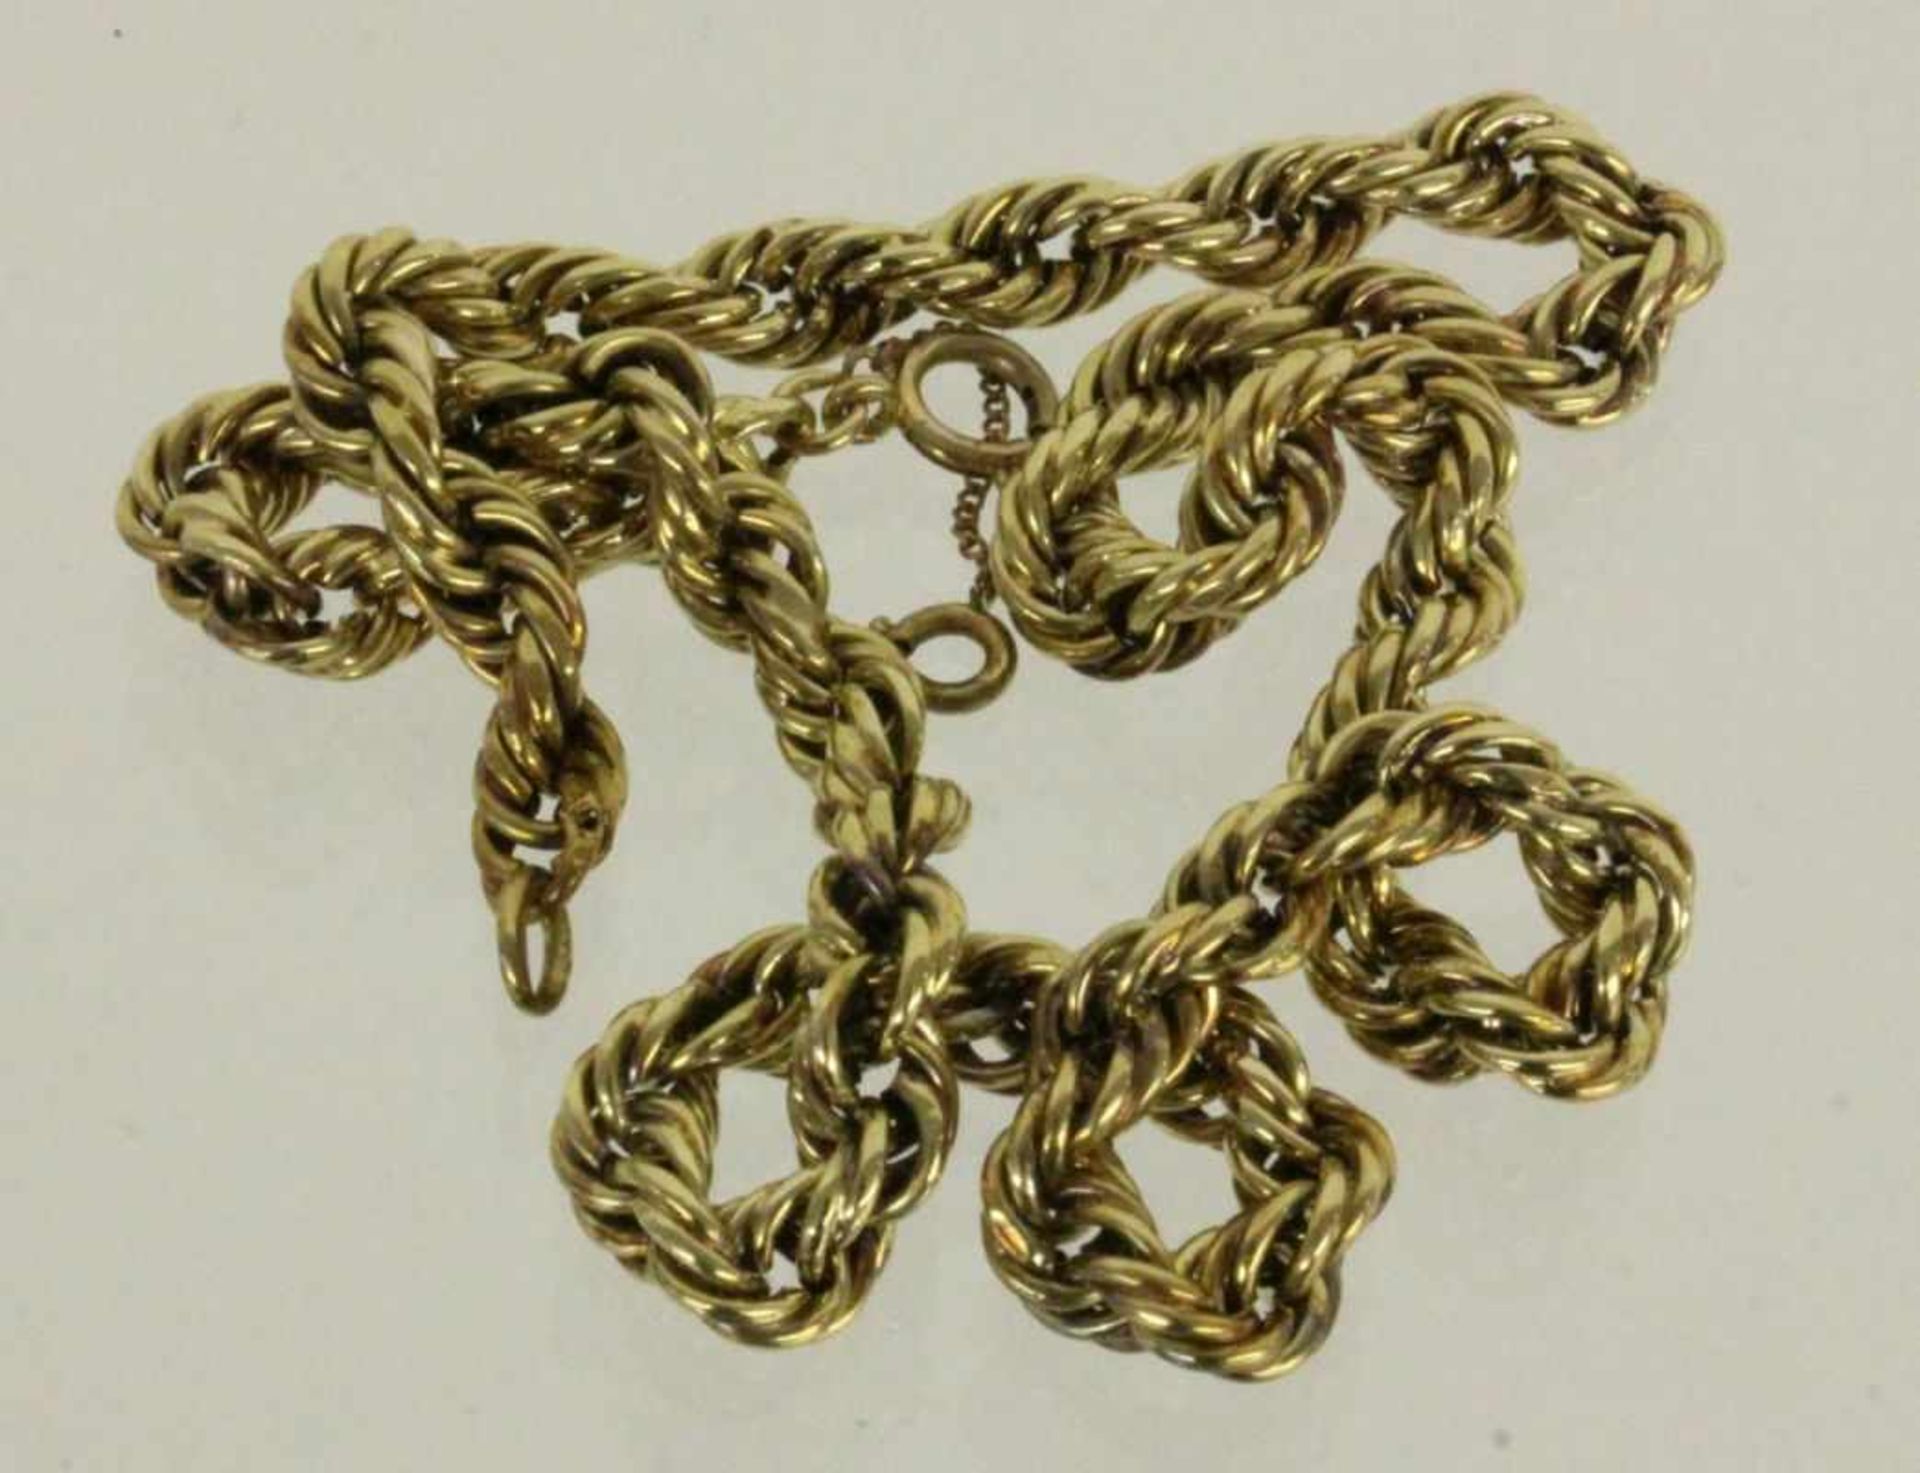 KORDELKETTE585/000 Gelbgold. L.43cm, ca. 17,85gA ROPE NECKLACE 585/000 yellow gold. 43 cm long,